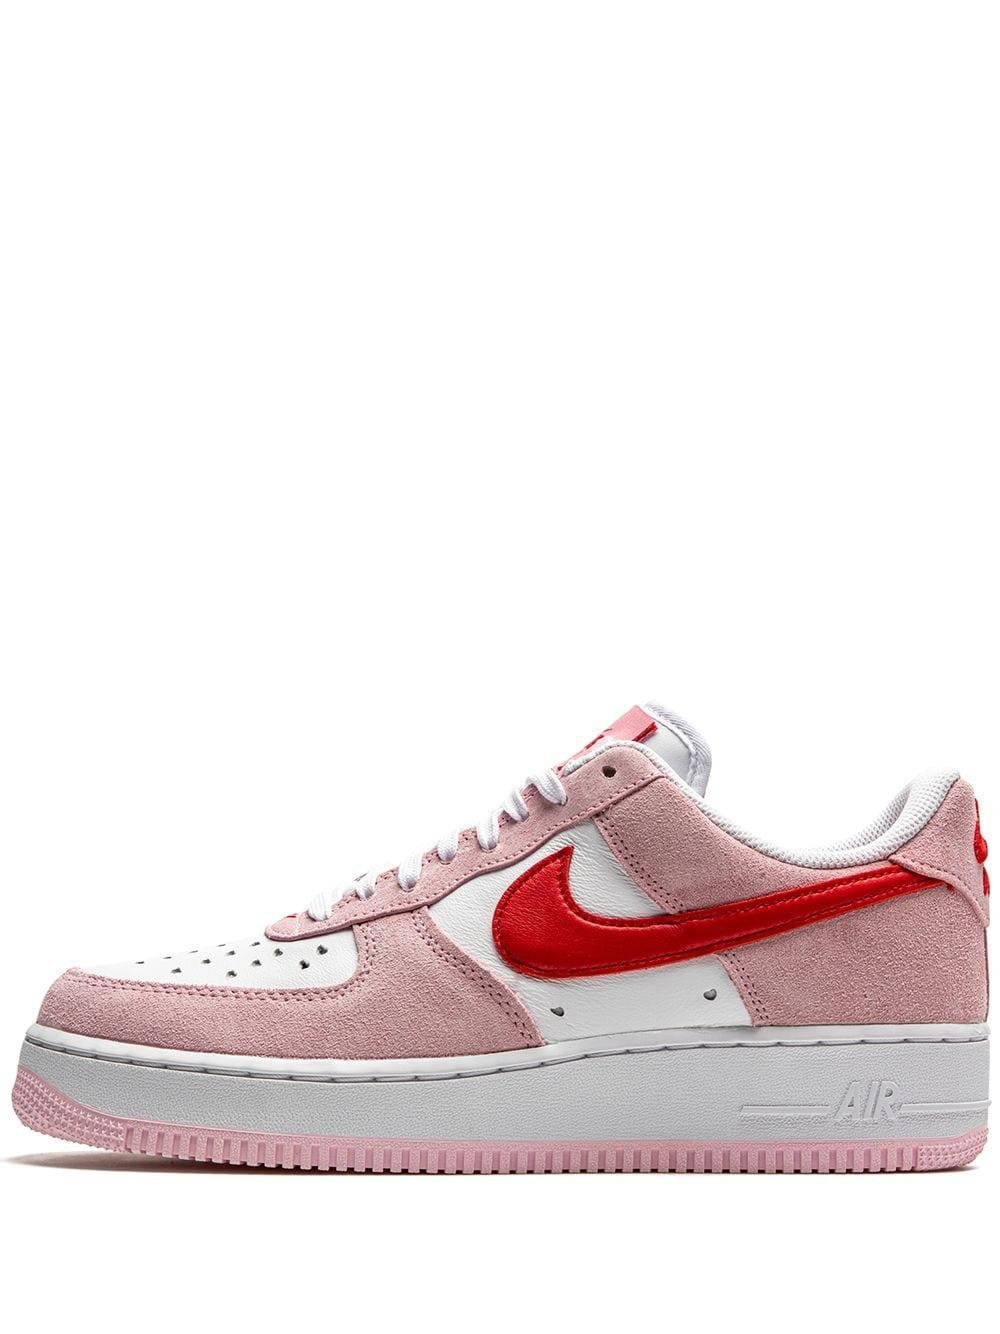 valentine air forces 2020